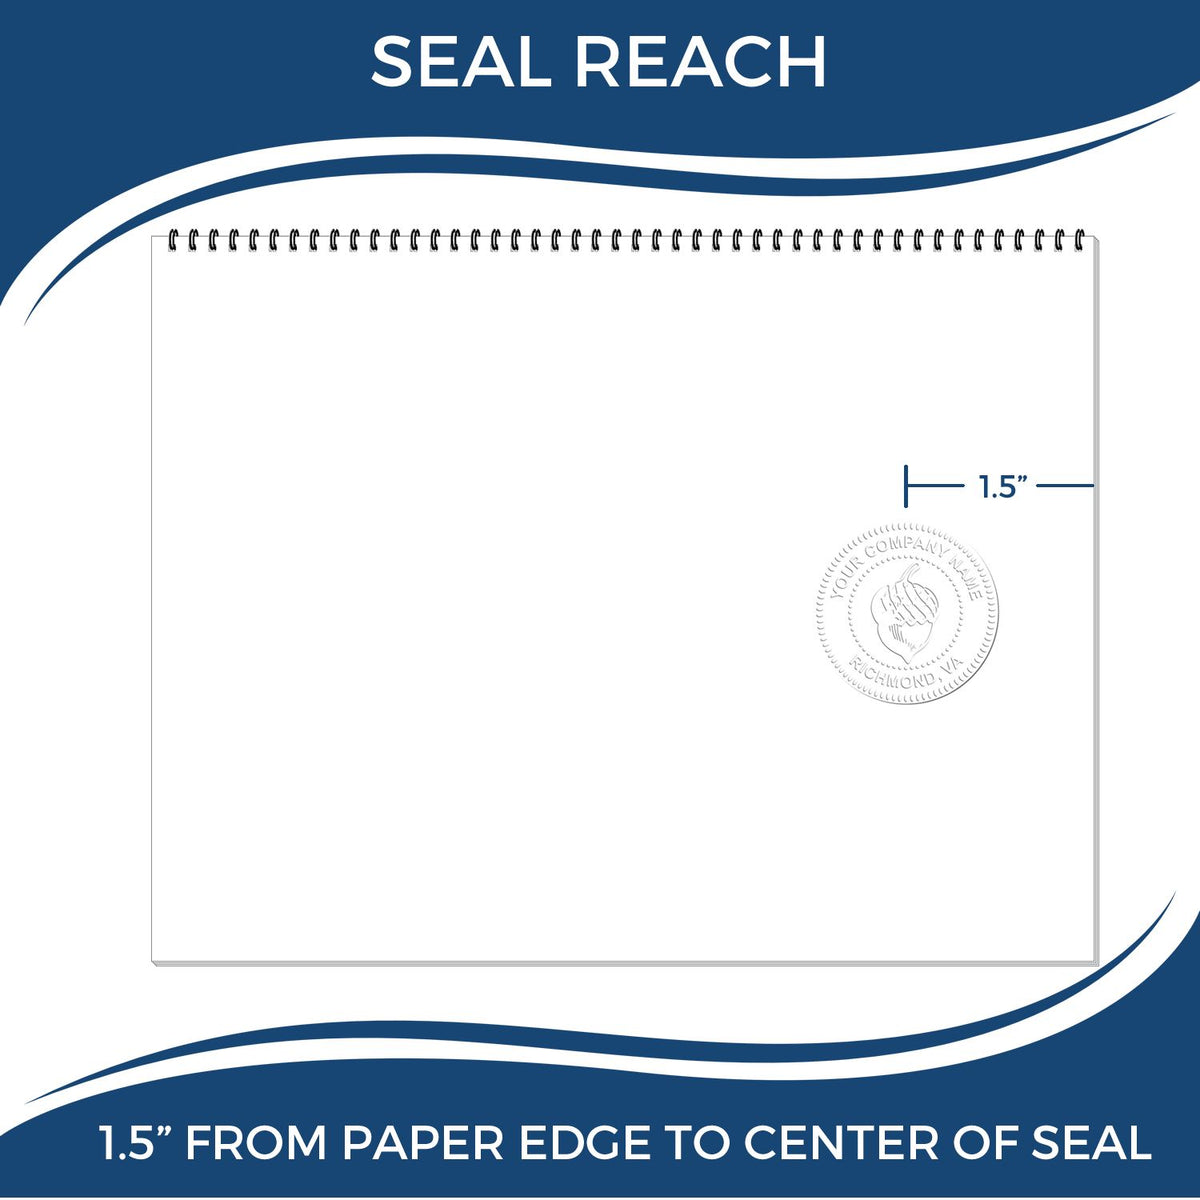 An infographic showing the seal reach which is represented by a ruler and a miniature seal image of the Handheld Delaware Land Surveyor Seal